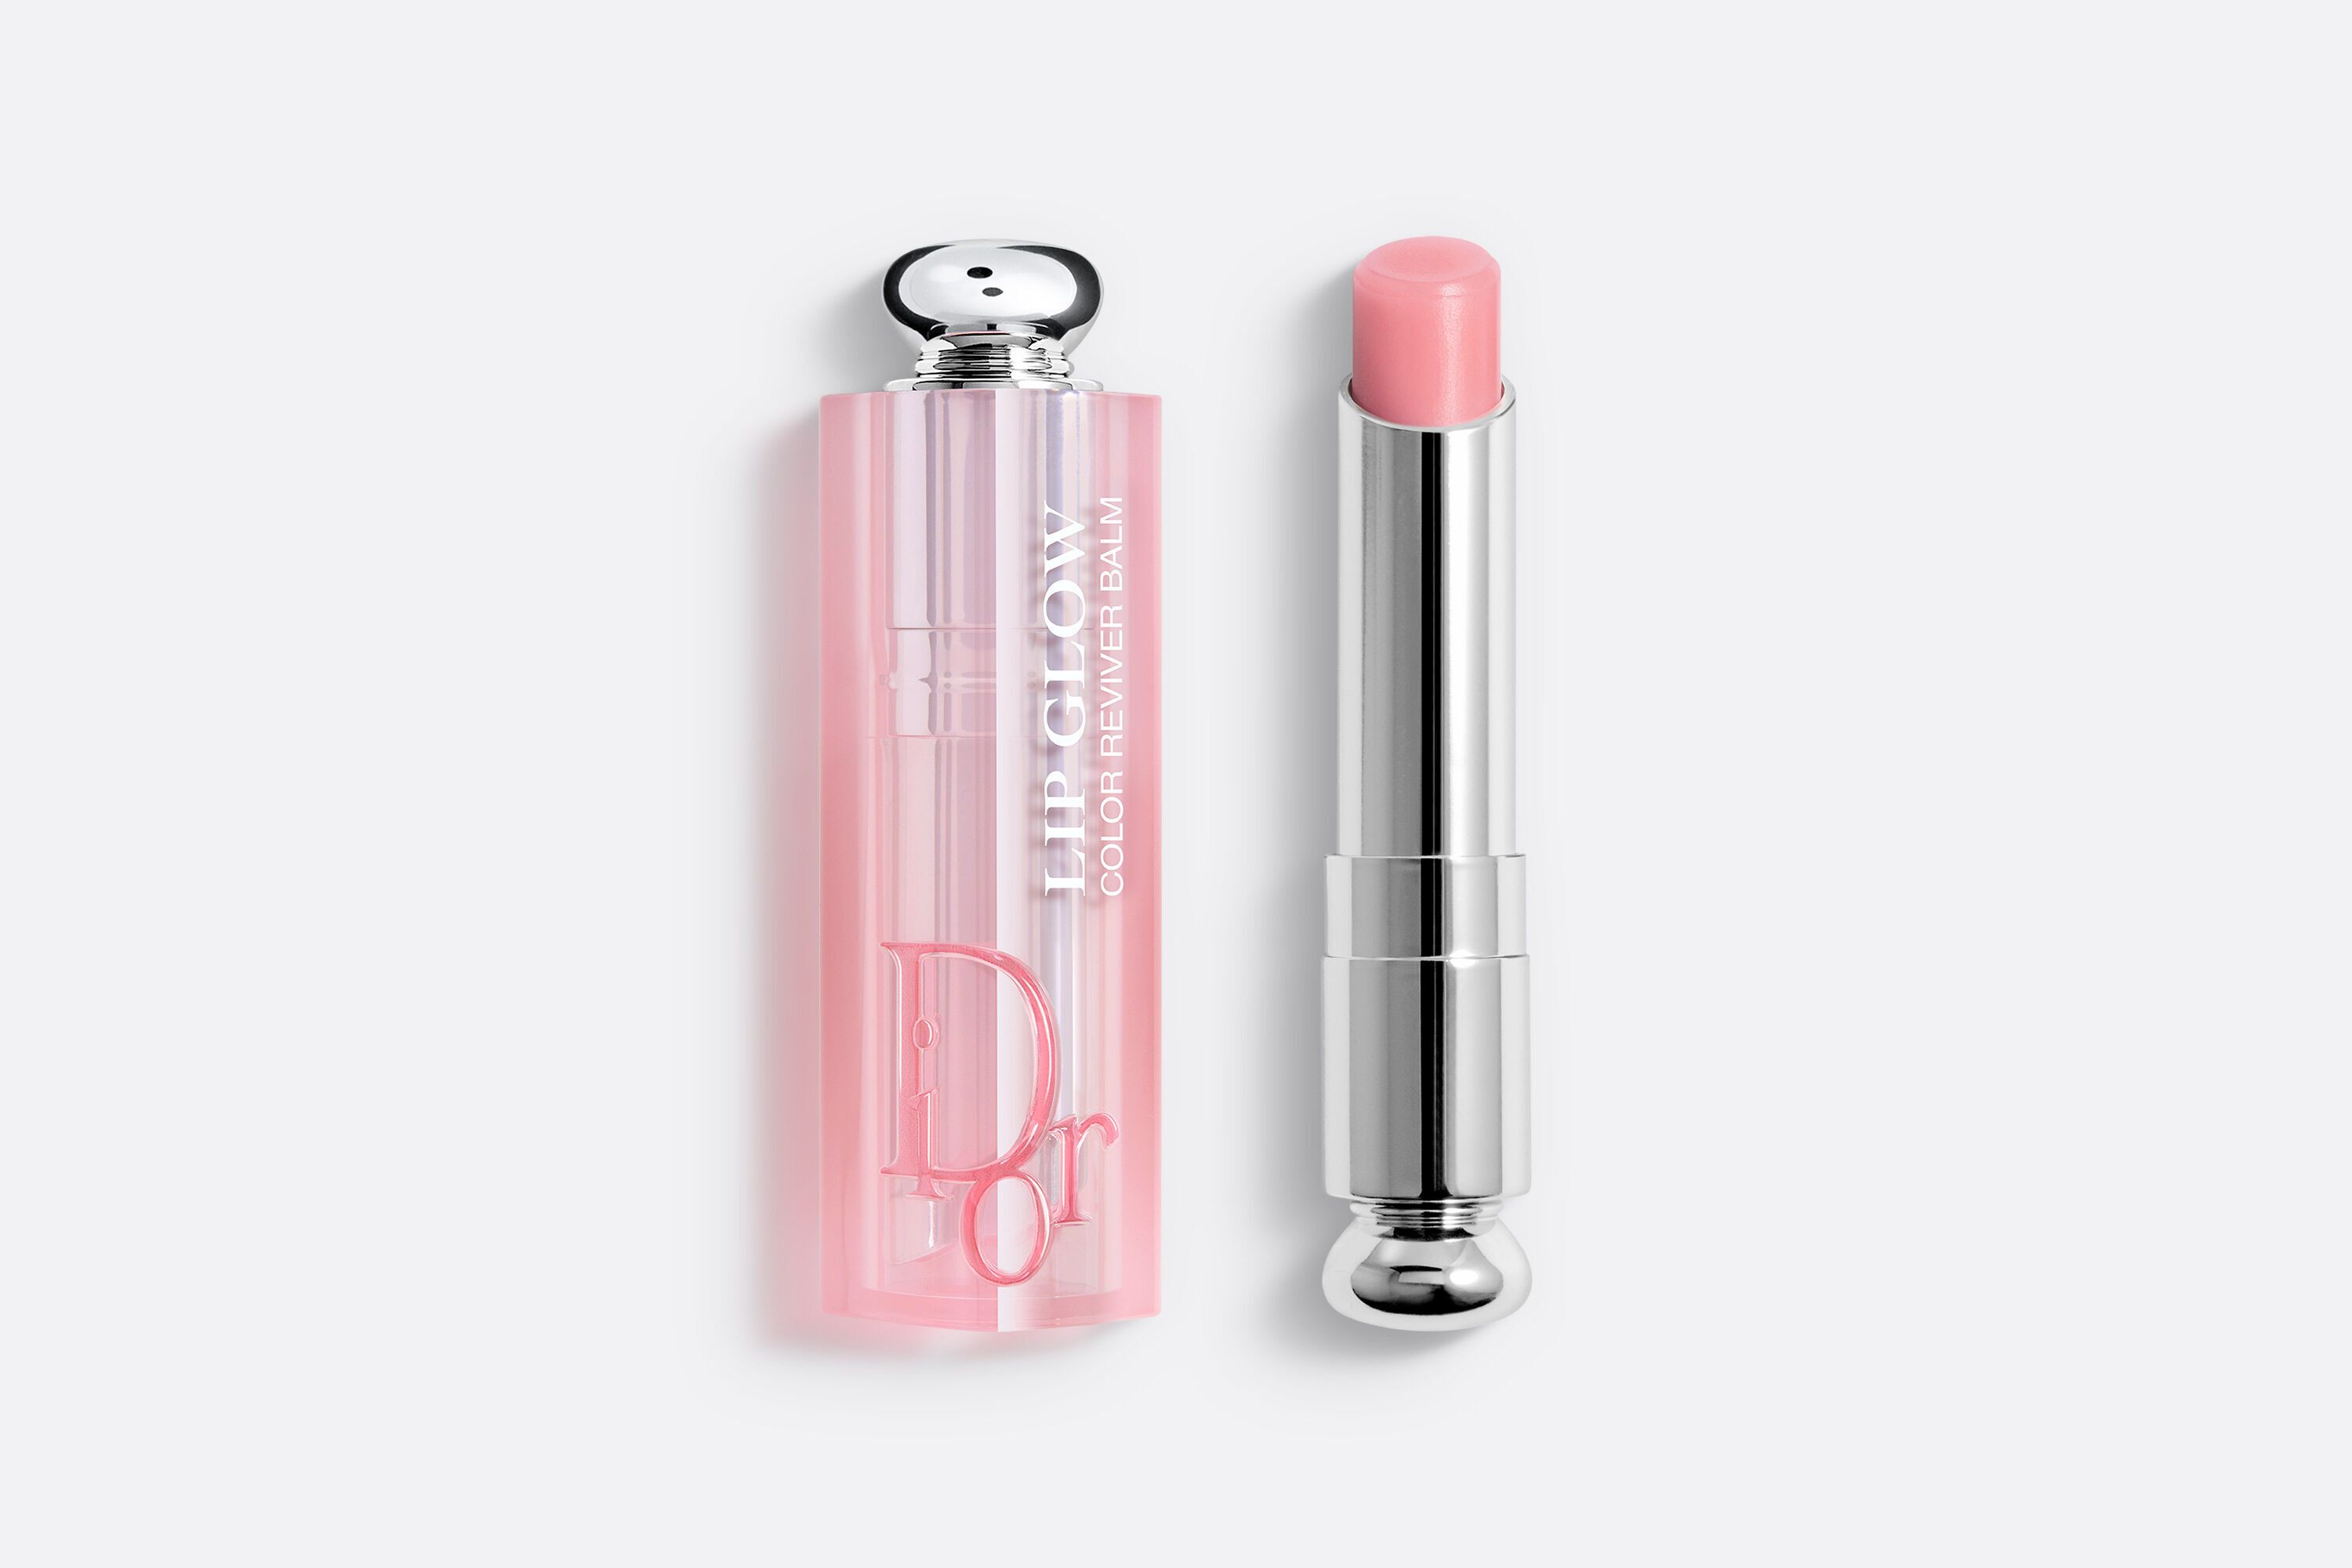 Dior Addict Lip Glow Balm - Mother's Day Gift Idea | Dior Beauty (US)